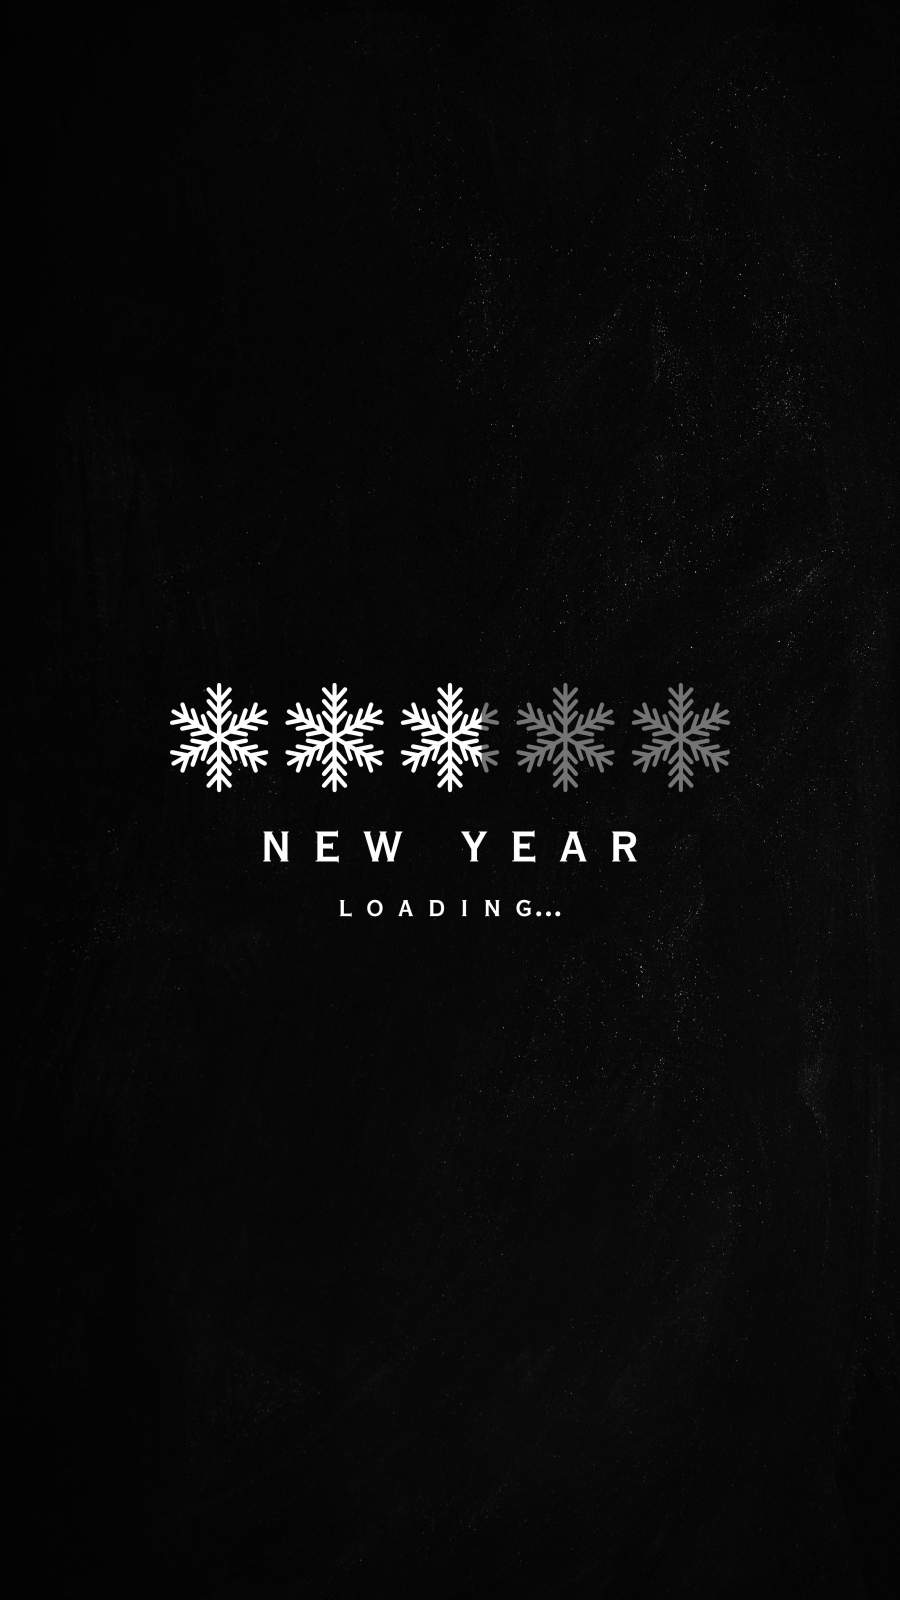 Mobile wallpaper Loading Future Words Minimalism Text 123629 download  the picture for free